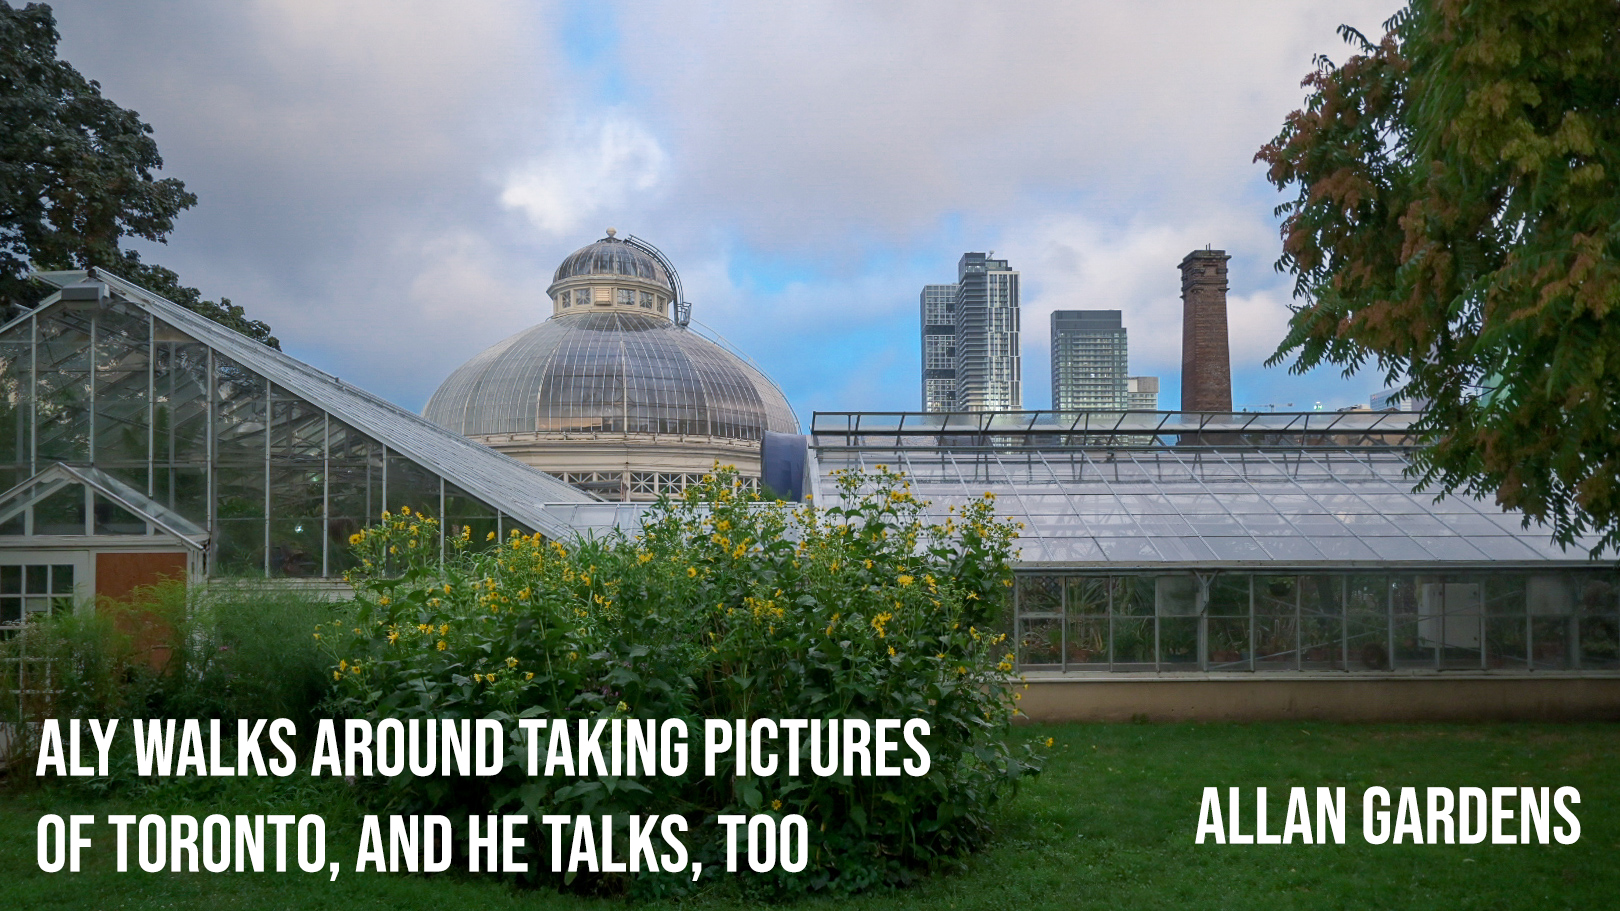 Allan Gardens | Aly walks around taking pictures of Toronto, and he talks, too